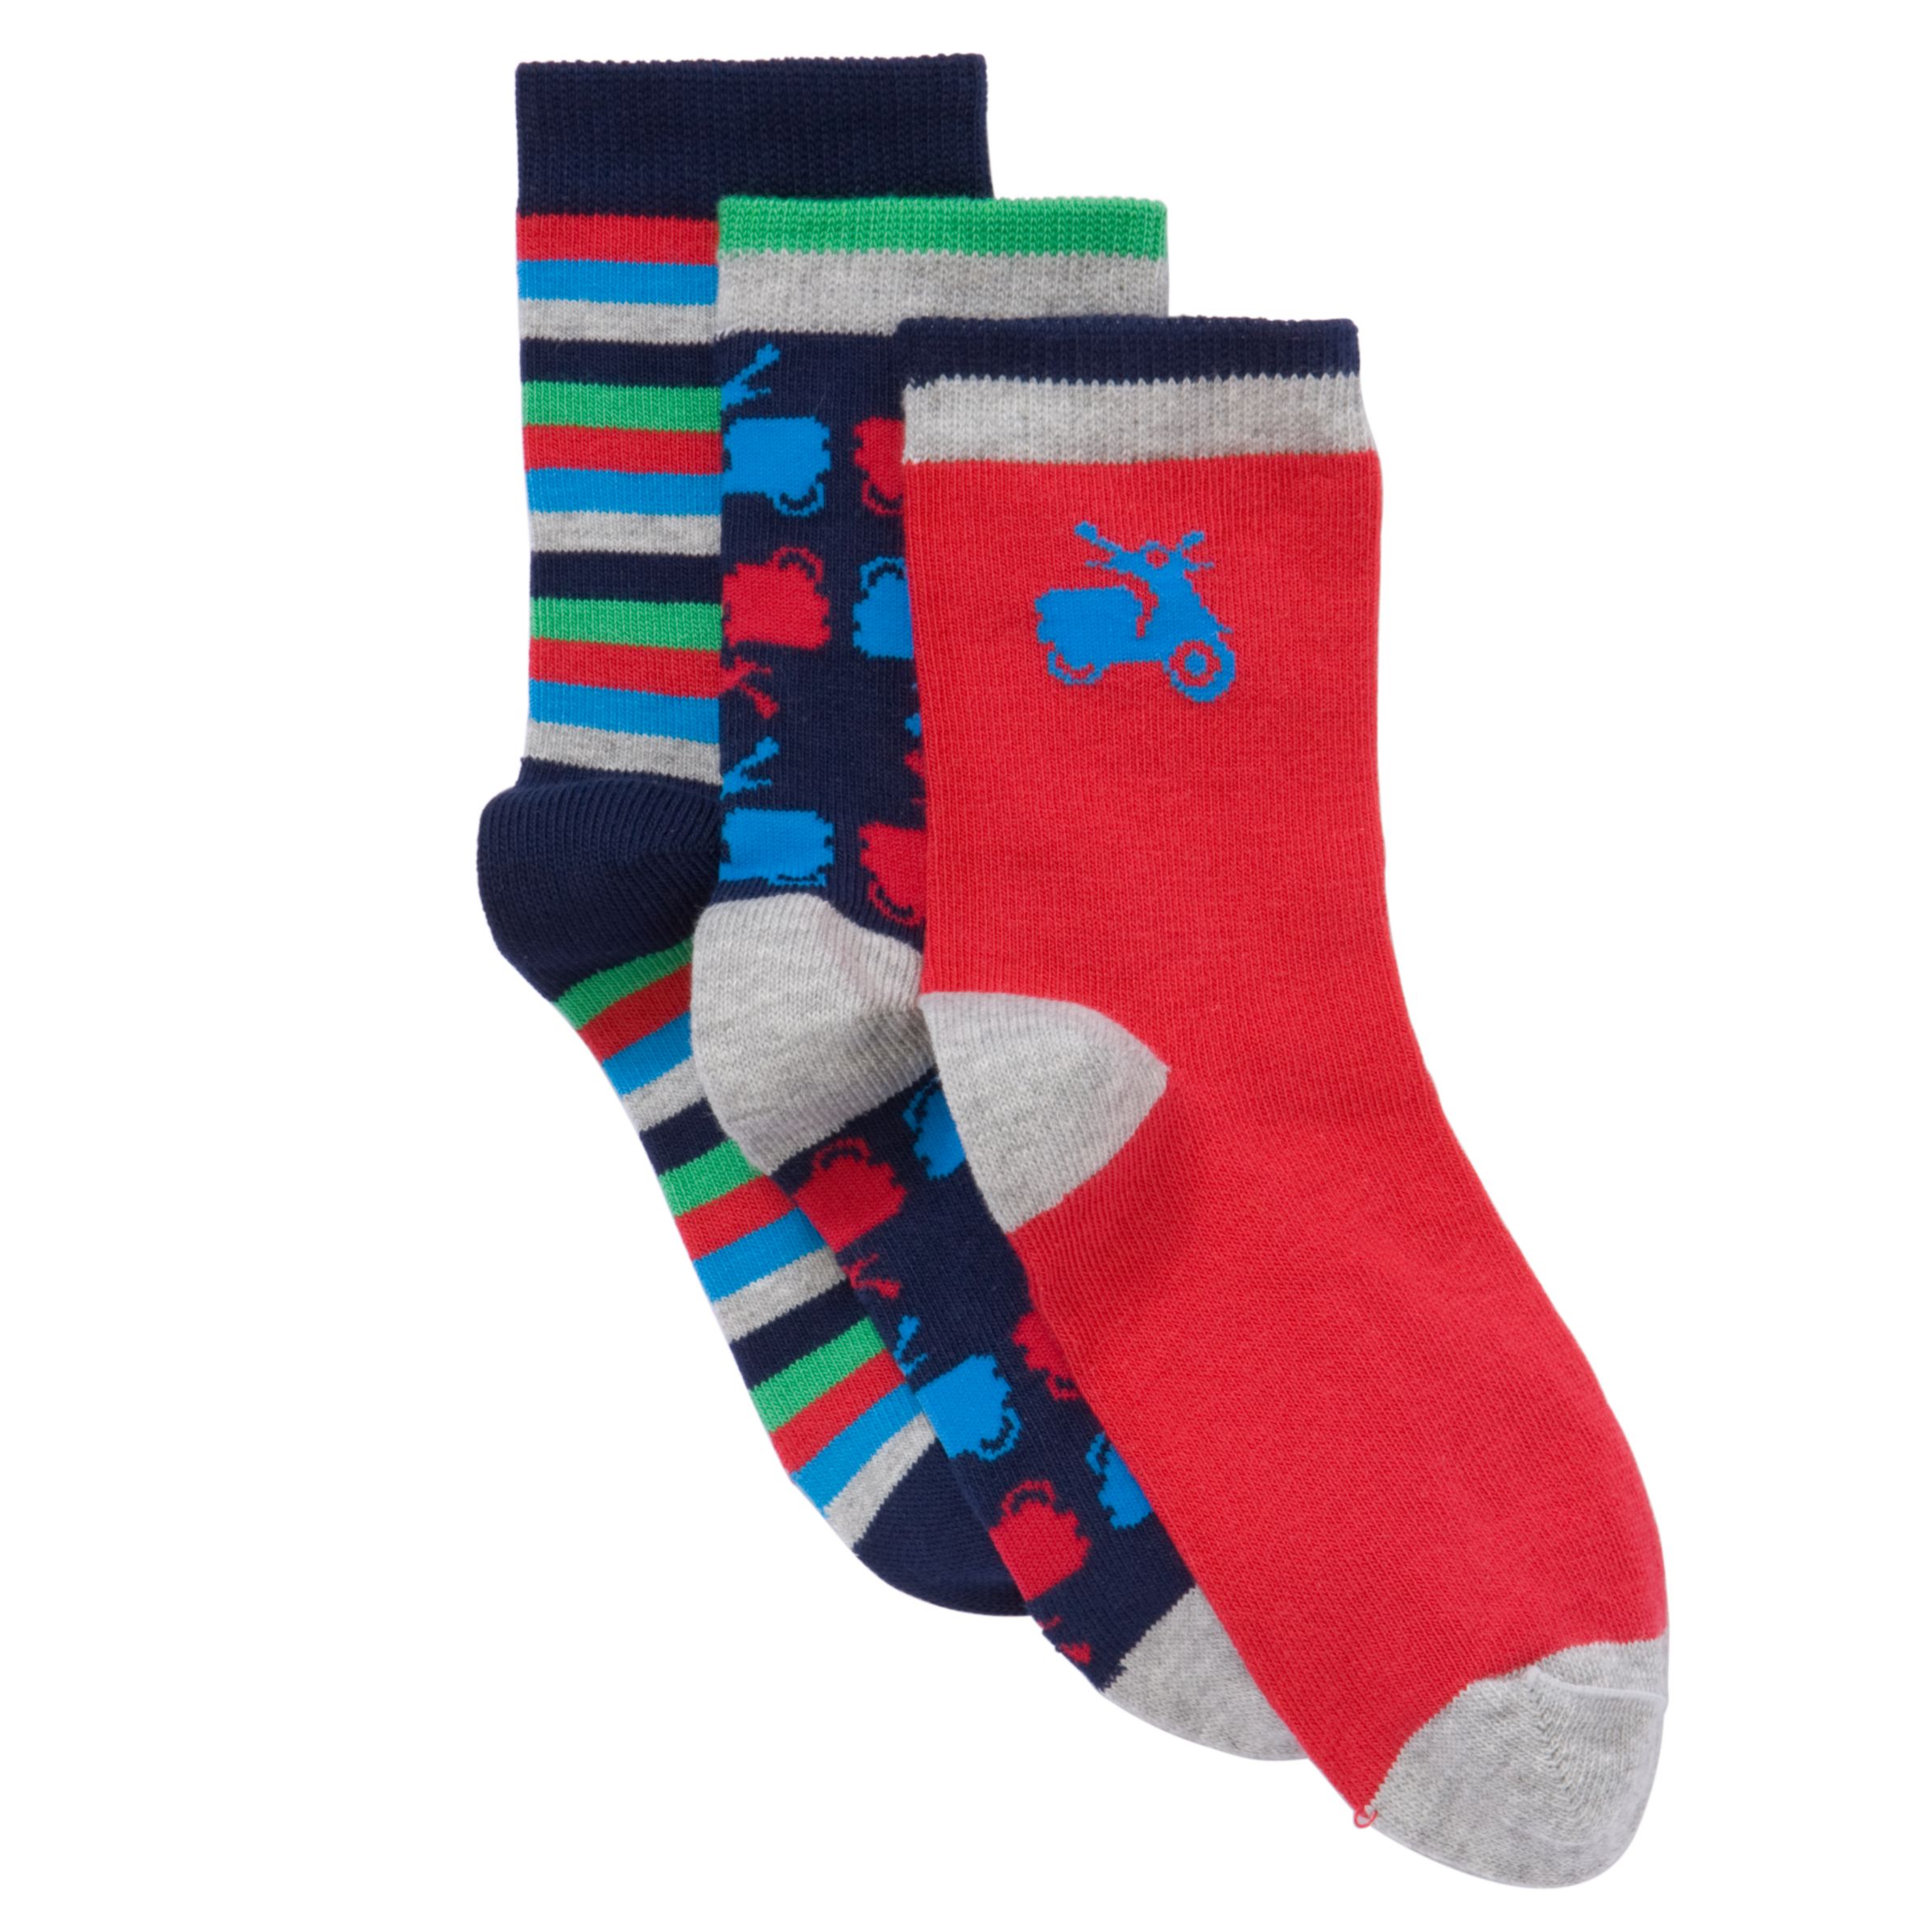 Scooter Socks, Pack of 3, Red/blue